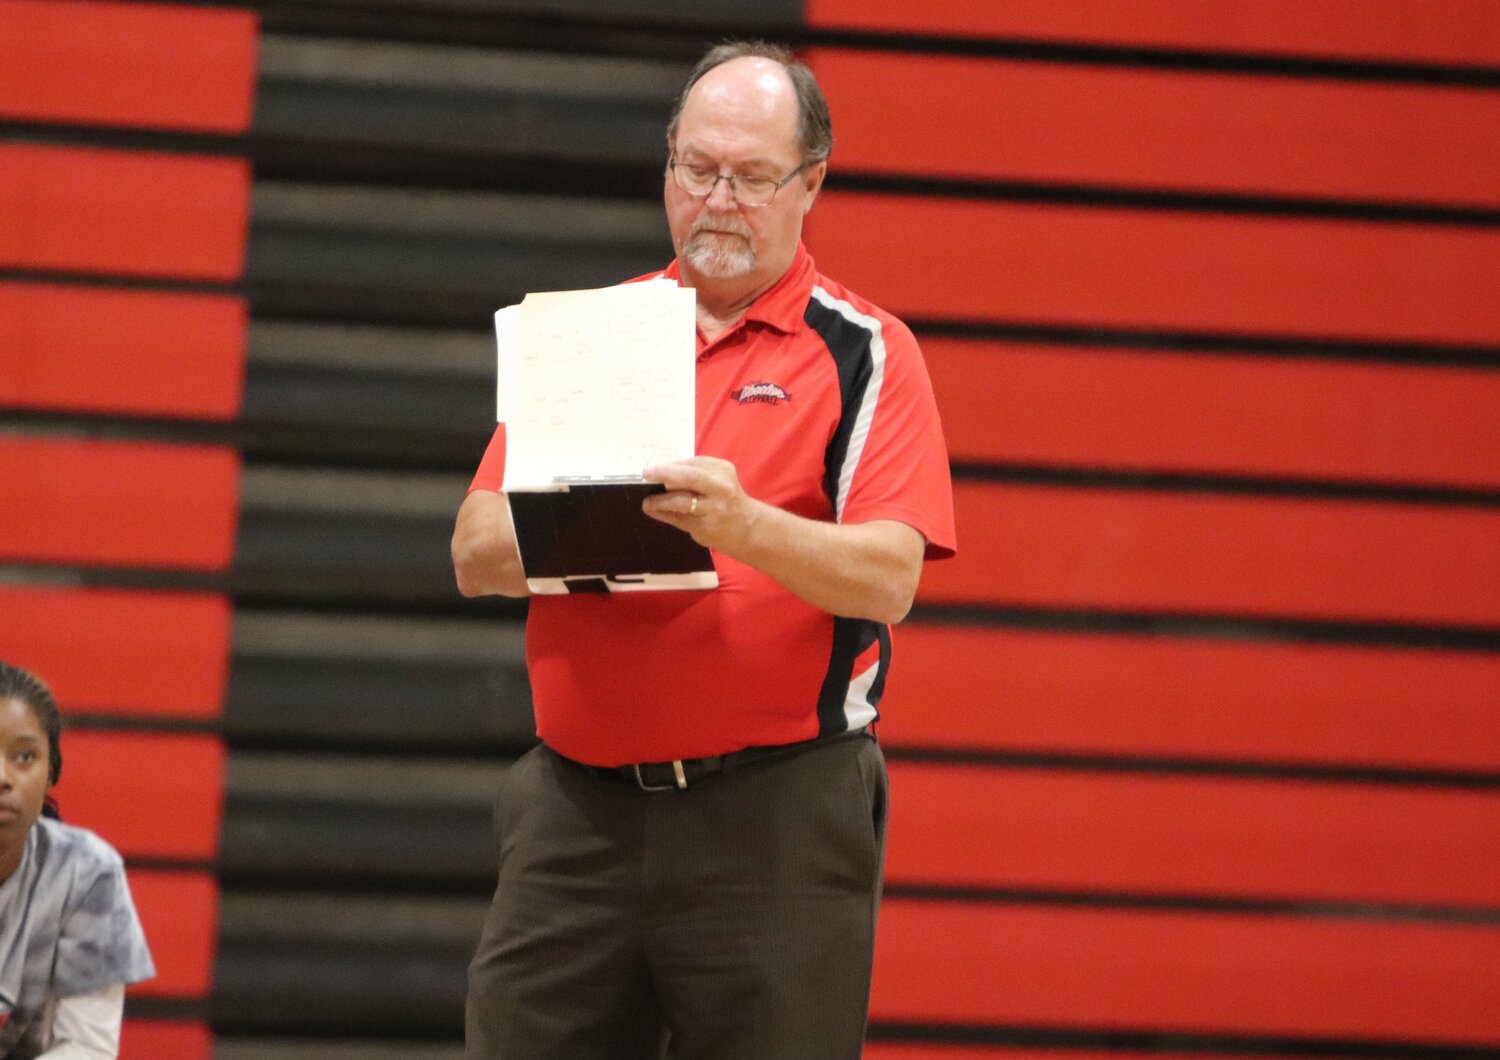 Randy Kindschuh takes a note during a game against St. Charles West this past season. Kindschuh announced he is retiring from his coaching and teaching position at Warrenton High School.